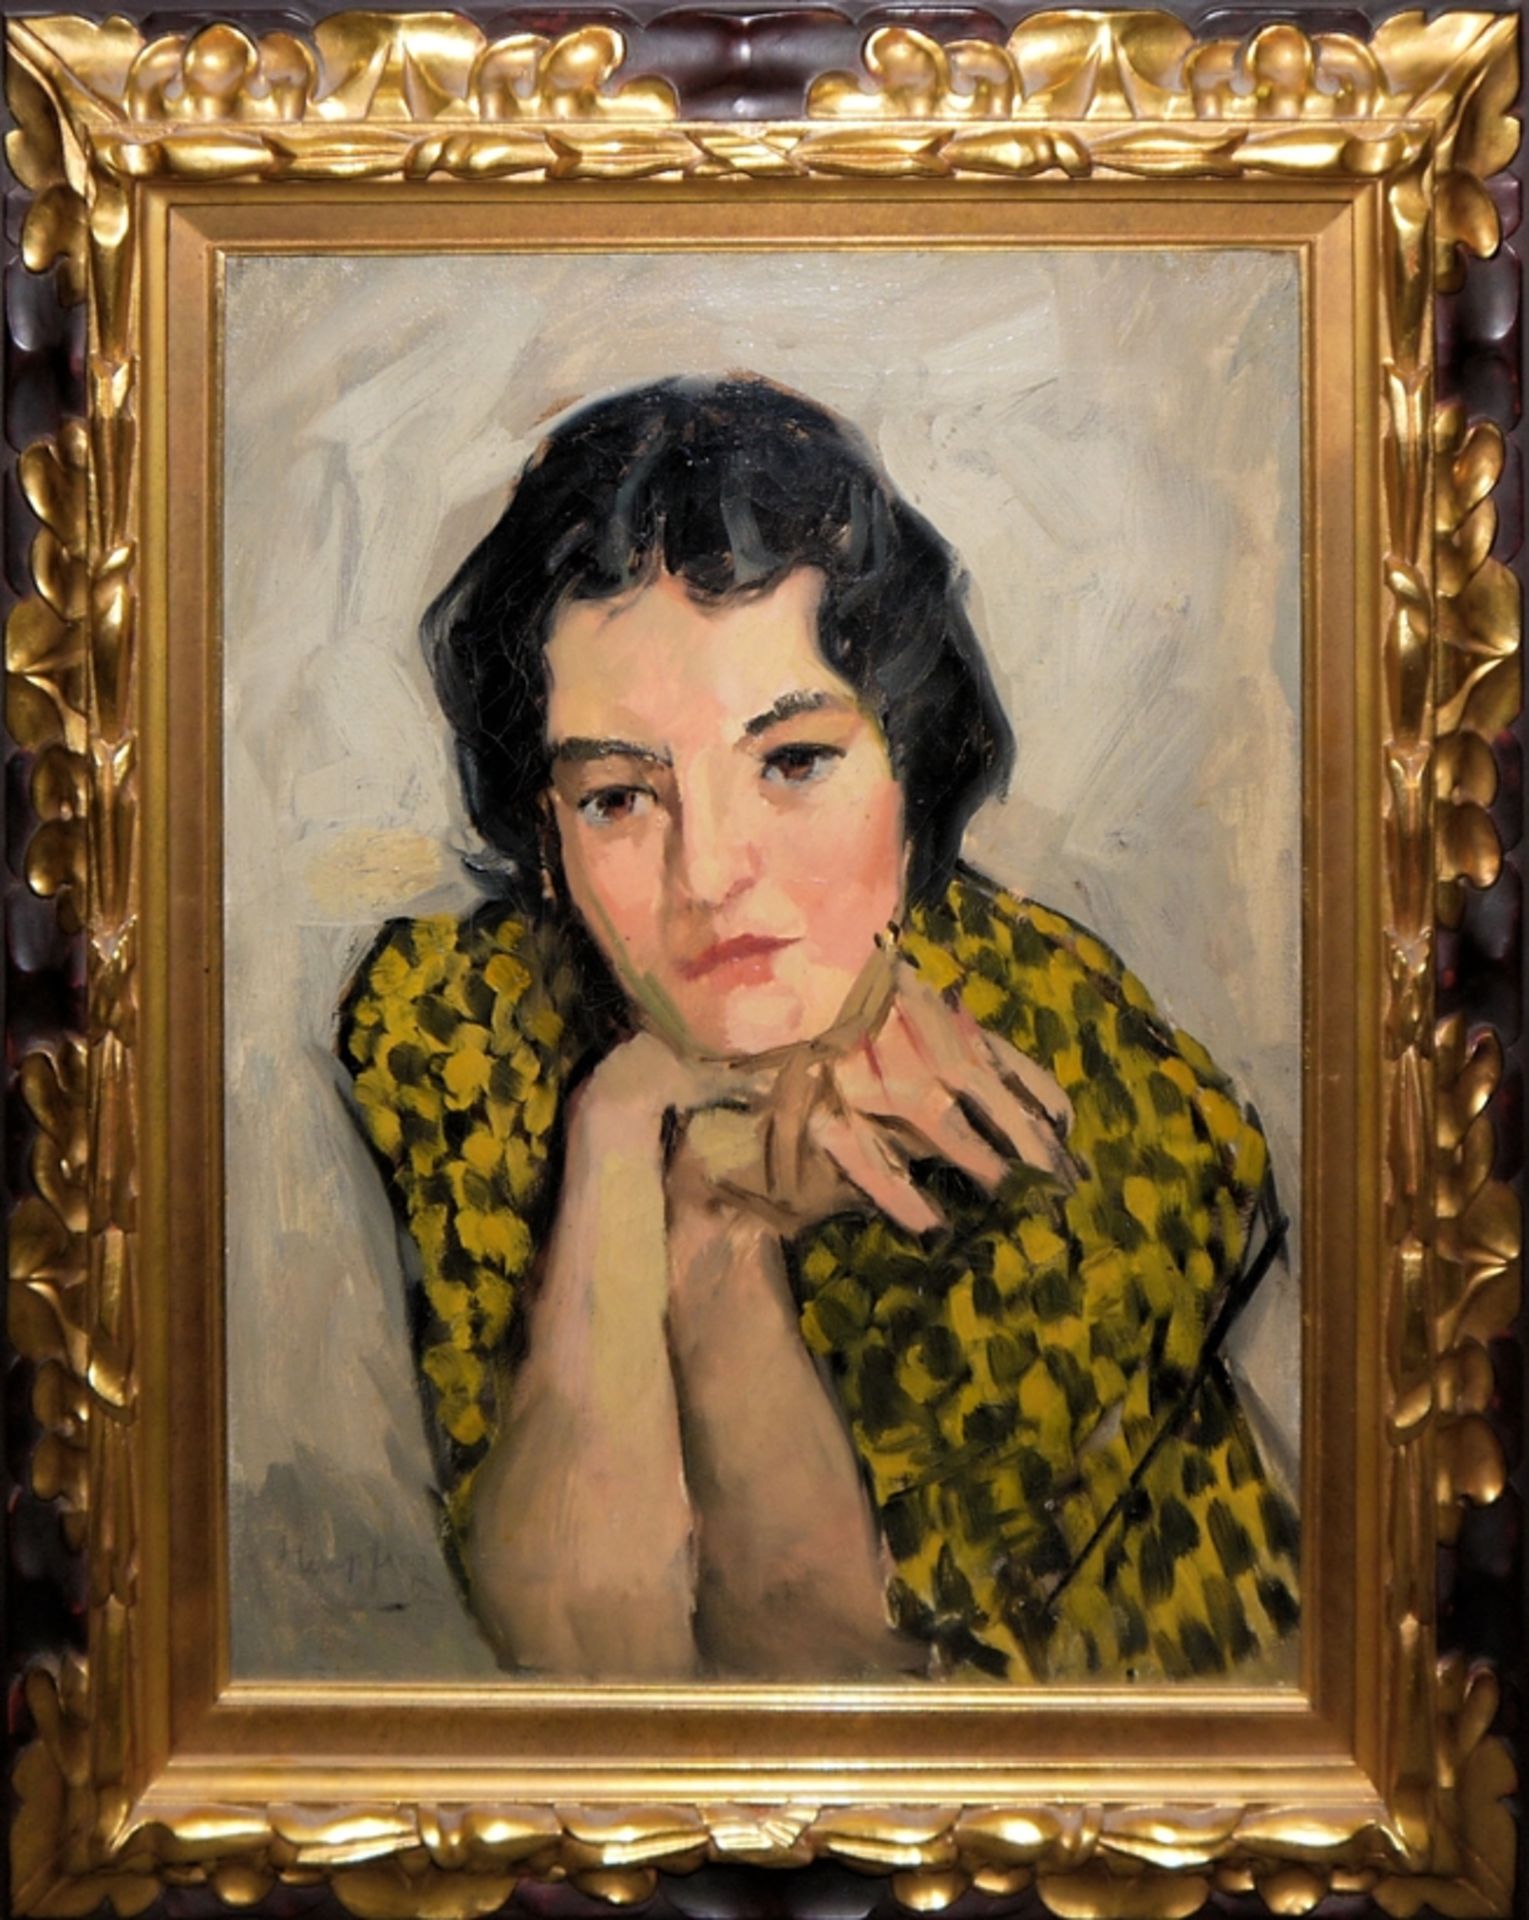 Wilhelm Hempfing, Portrait of a young woman, oil painting 1920s, in a splendid frame